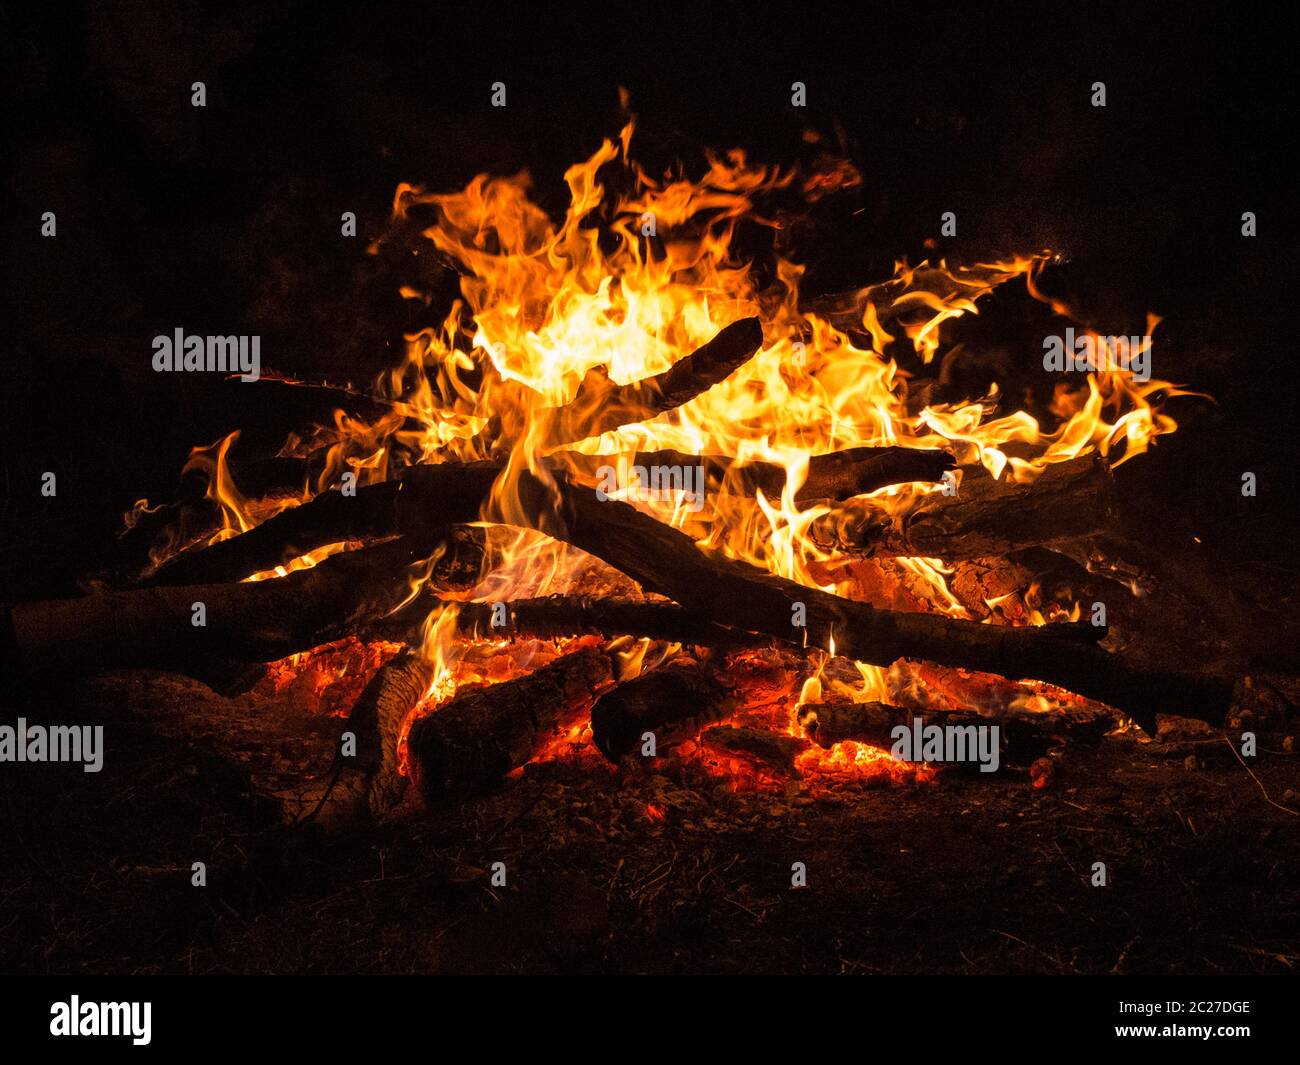 Hot campfire place full of crackling fire wood. Stock Photo